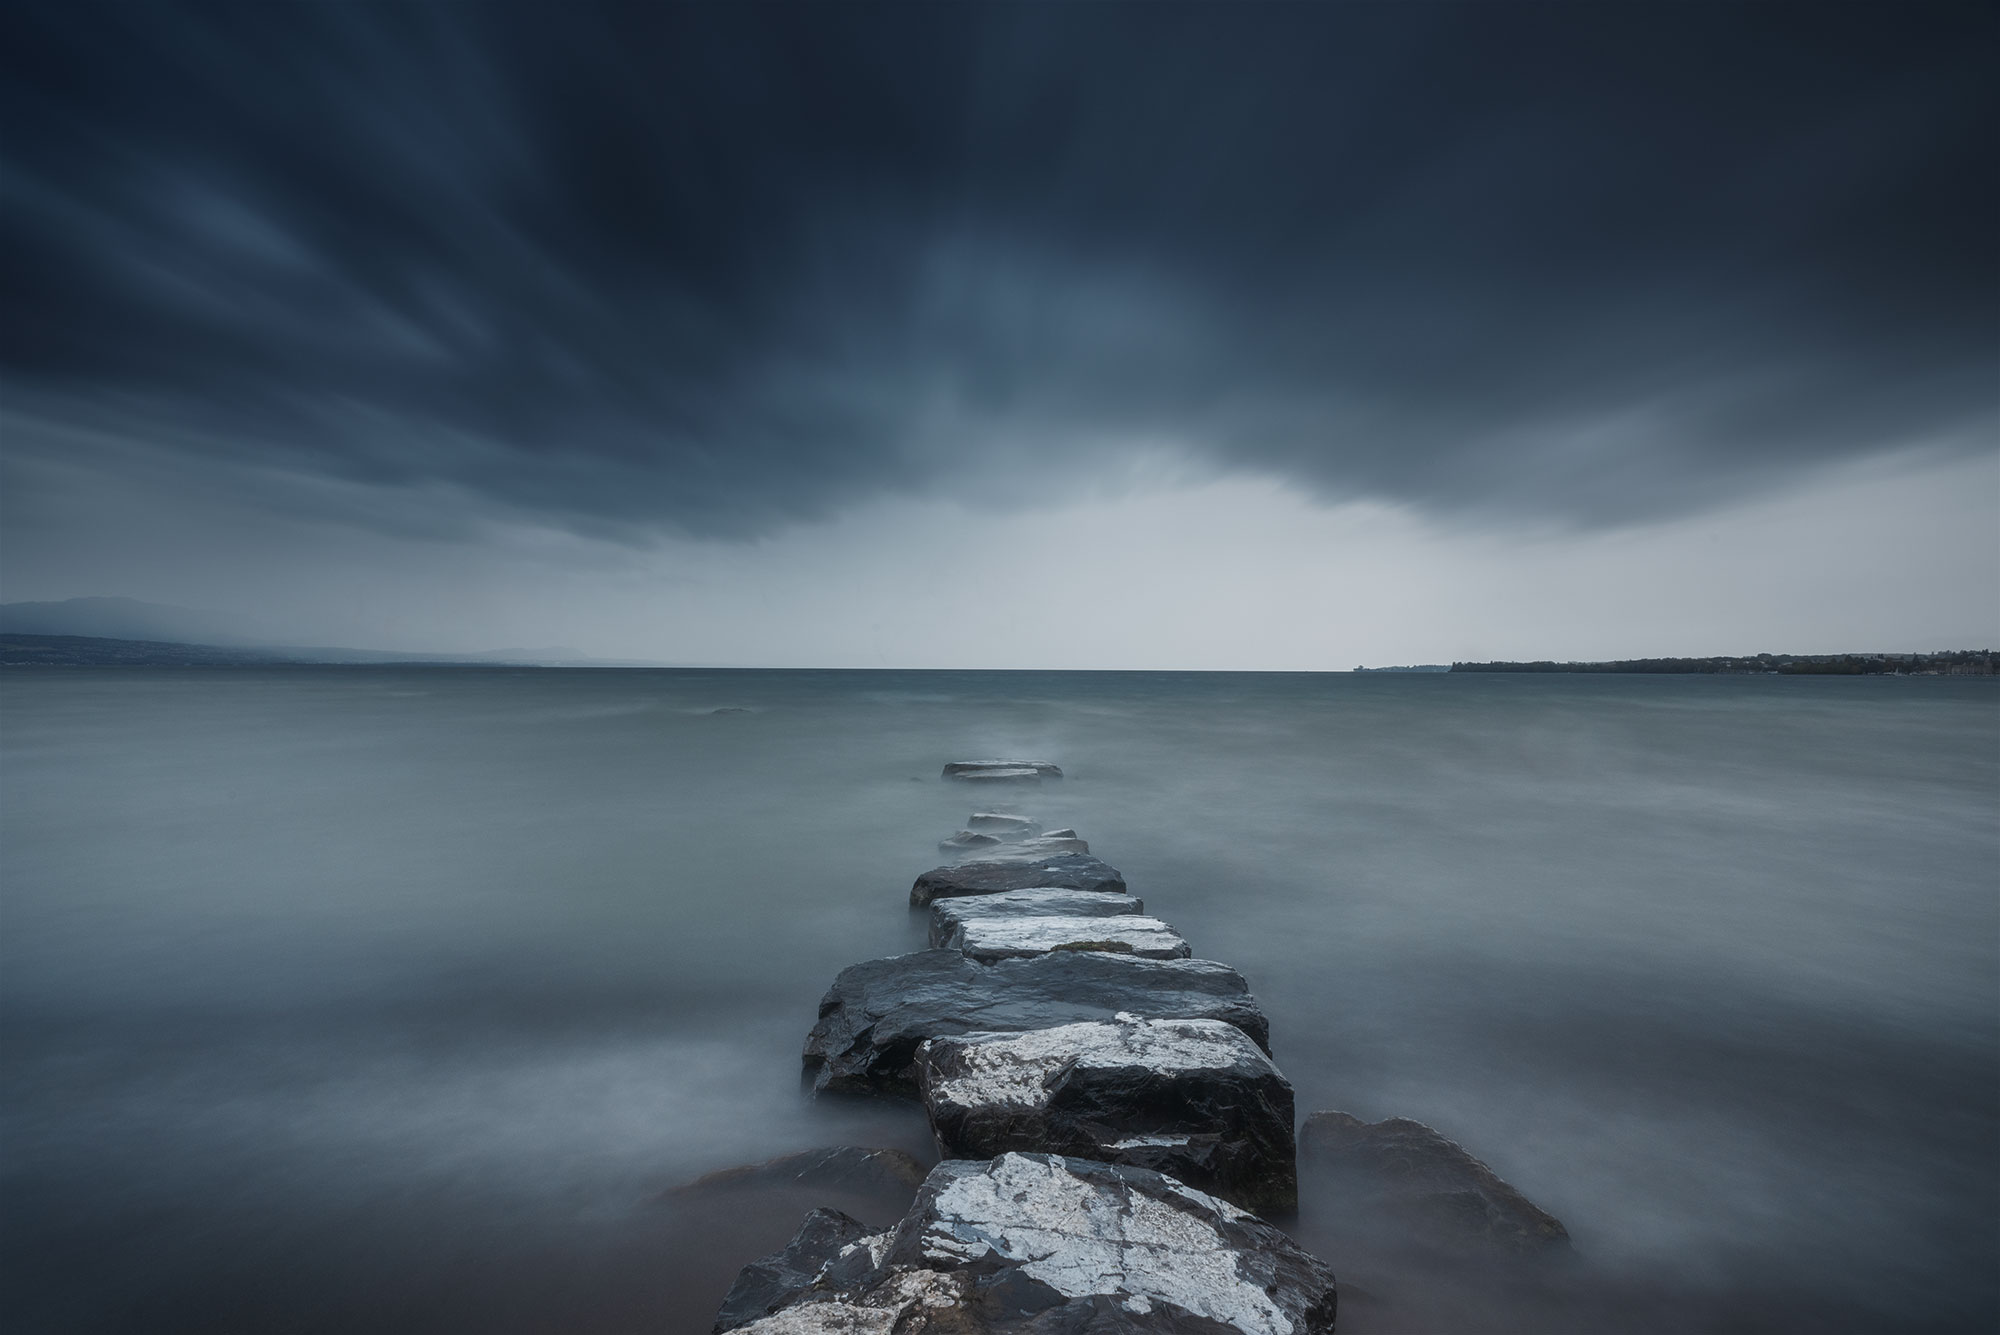 This compelling image encapsulates the dynamic beauty of Préverenges Beach in Switzerland during a storm, as captured through a long exposure landscape photograph. The turbulent weather adds an element of drama to the scene, with the dark, moody clouds swirling above Lake Geneva. The extended exposure smoothens the water's surface, creating a surreal reflection of the stormy atmosphere. The contrast between the agitated sky and the serene lake serves as a poignant reminder of nature's power and beauty. This photograph invites viewers to appreciate the intensity of the moment and the unique perspective offered by long exposure photography.